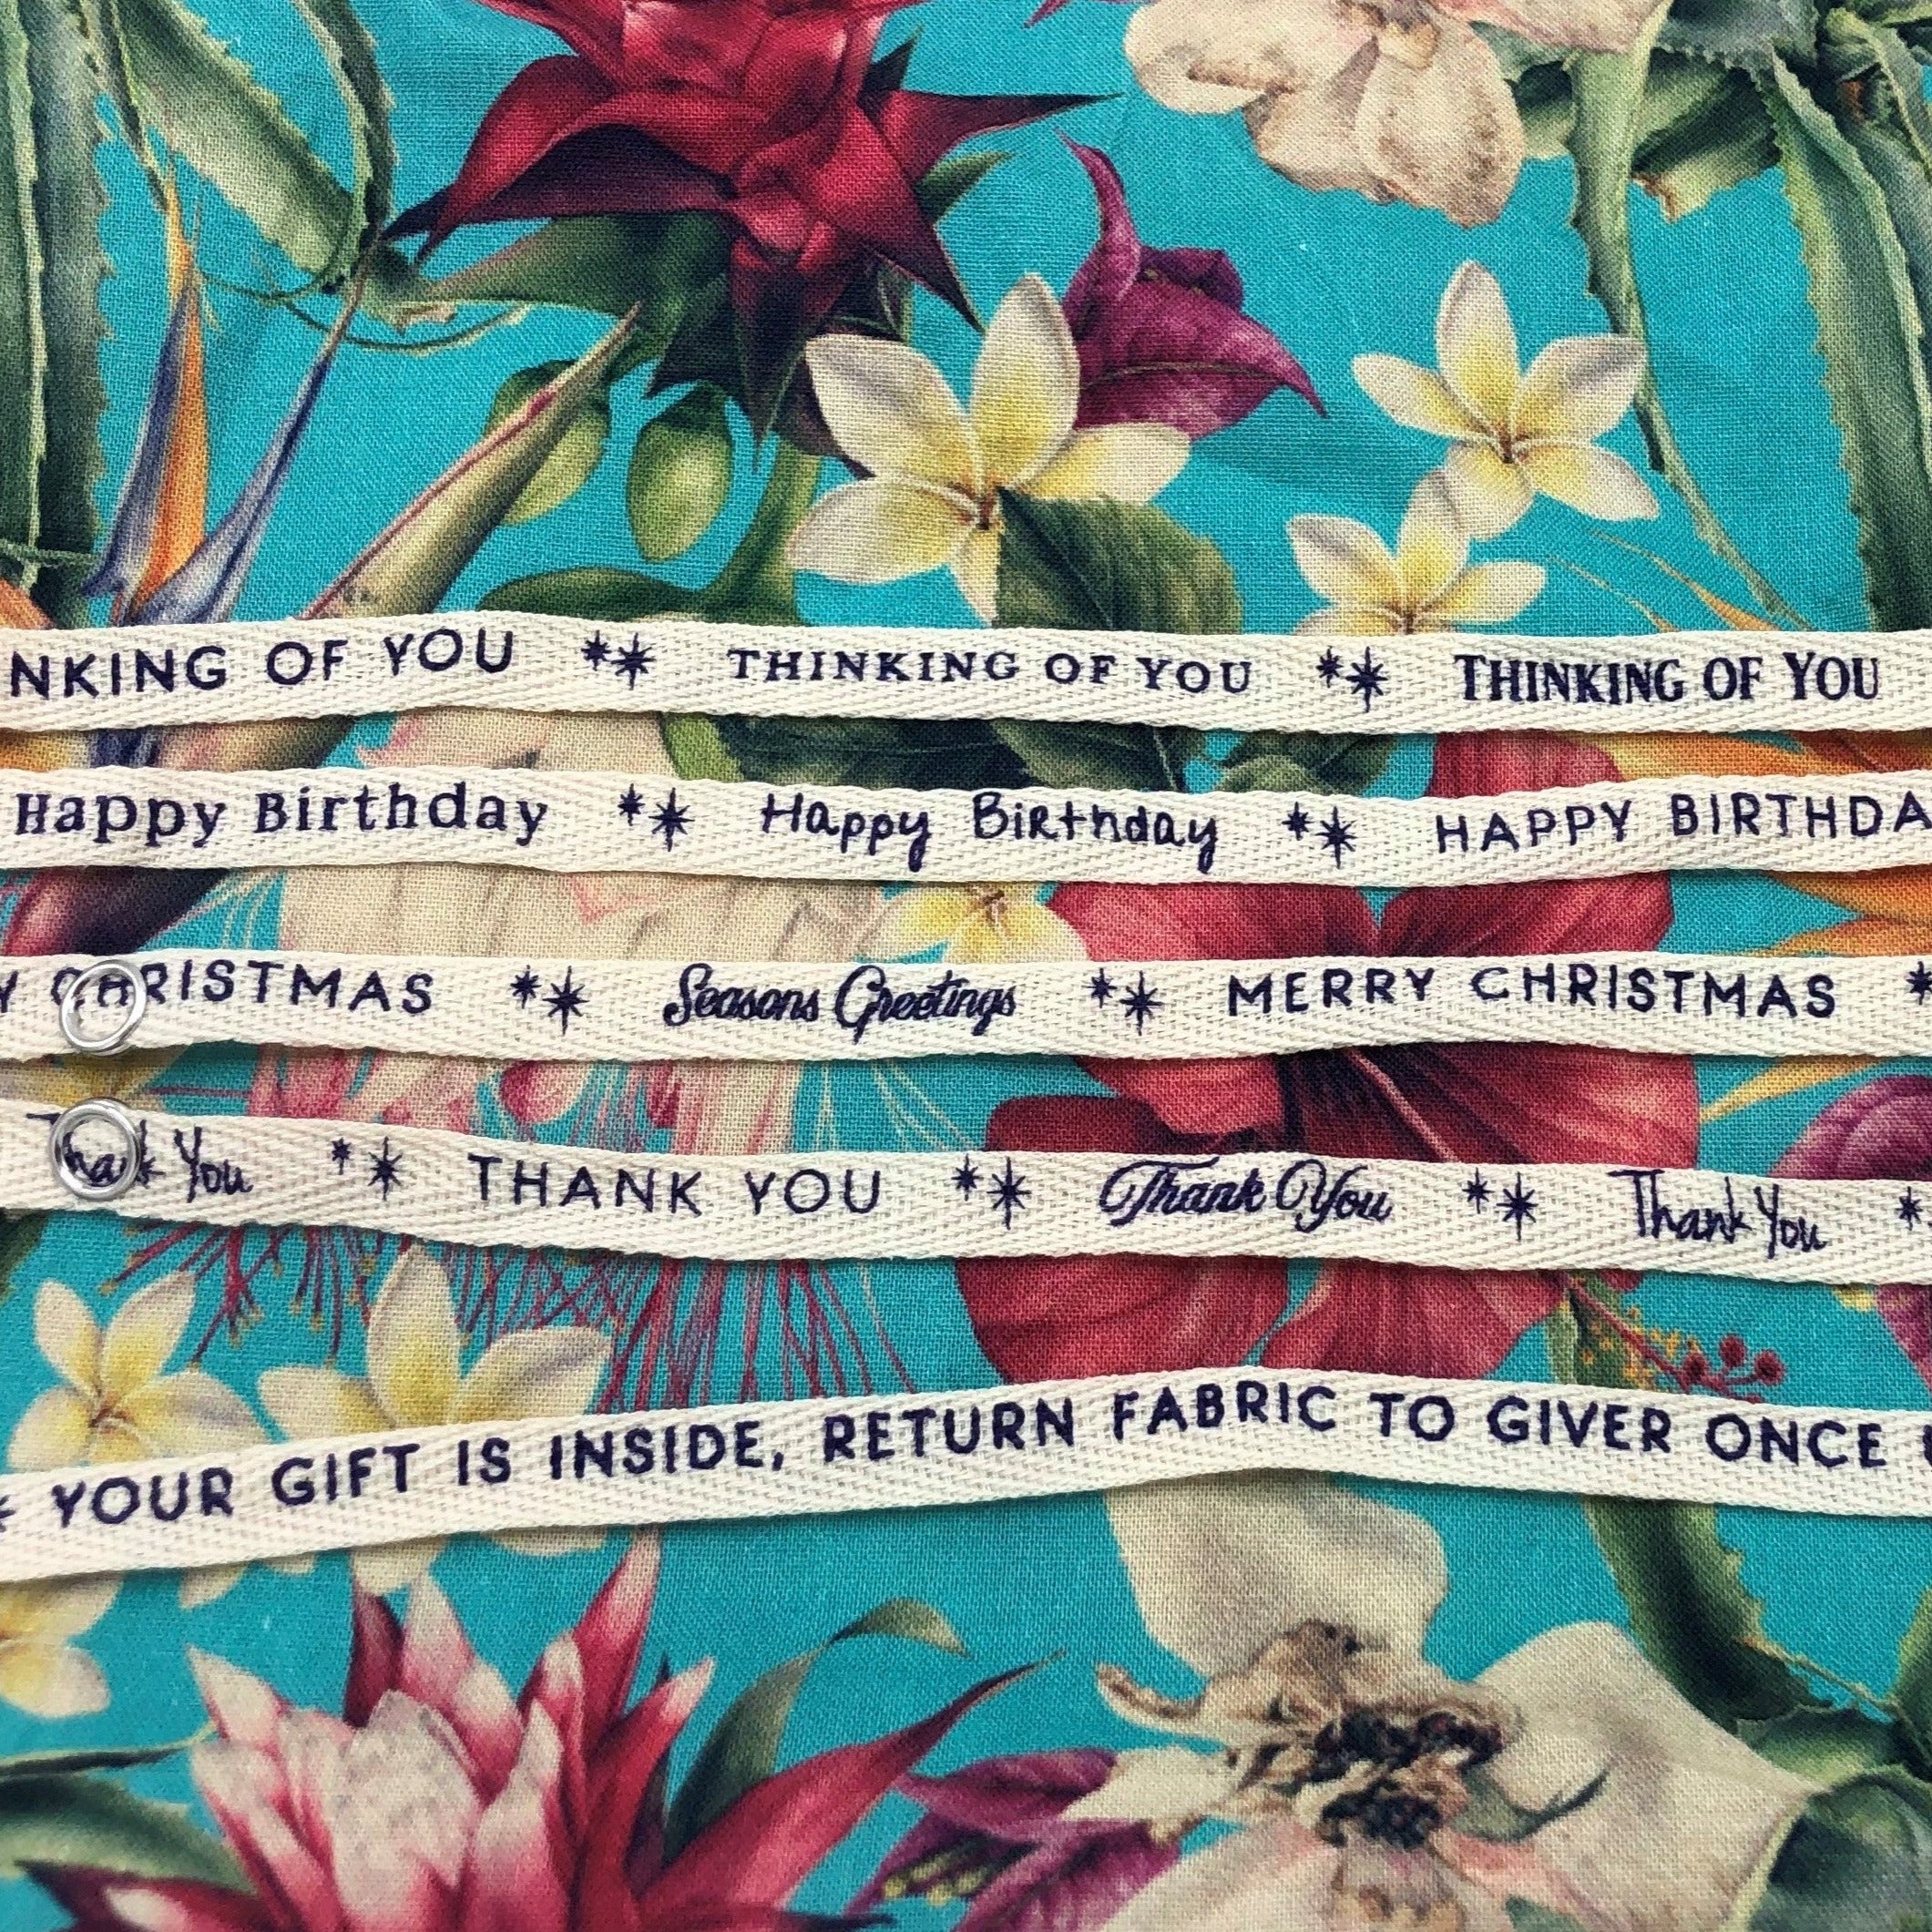 5 selection of message ribbons